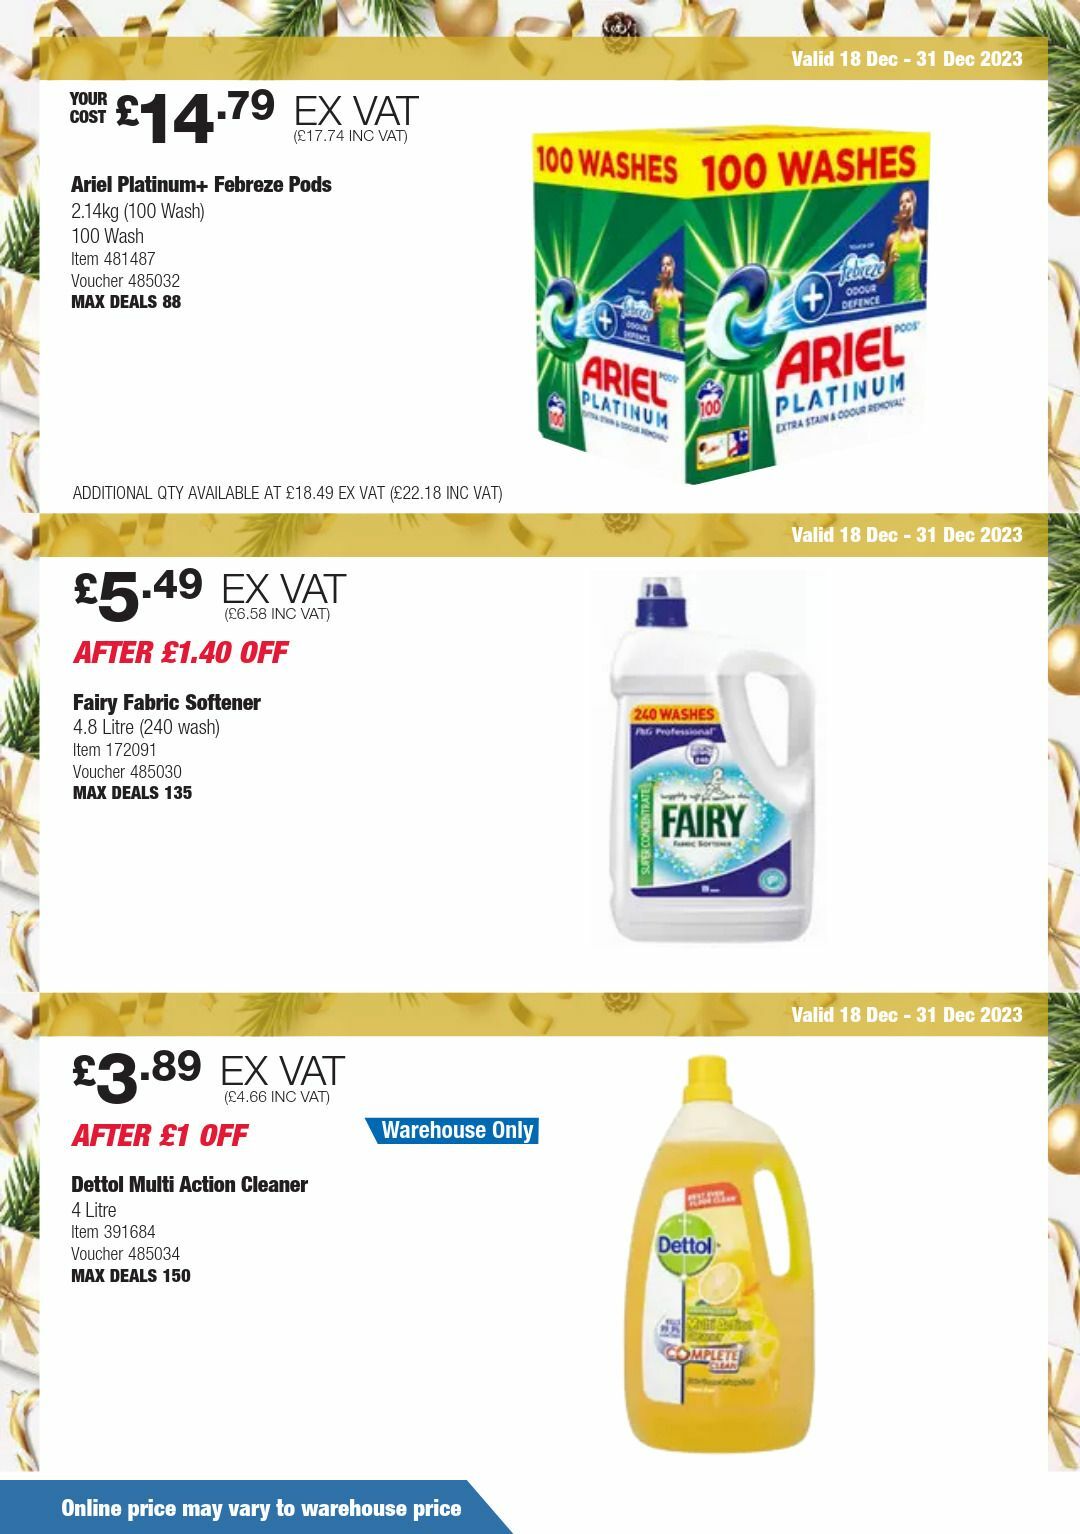 Costco Scotland & Wales Offers from 18 December